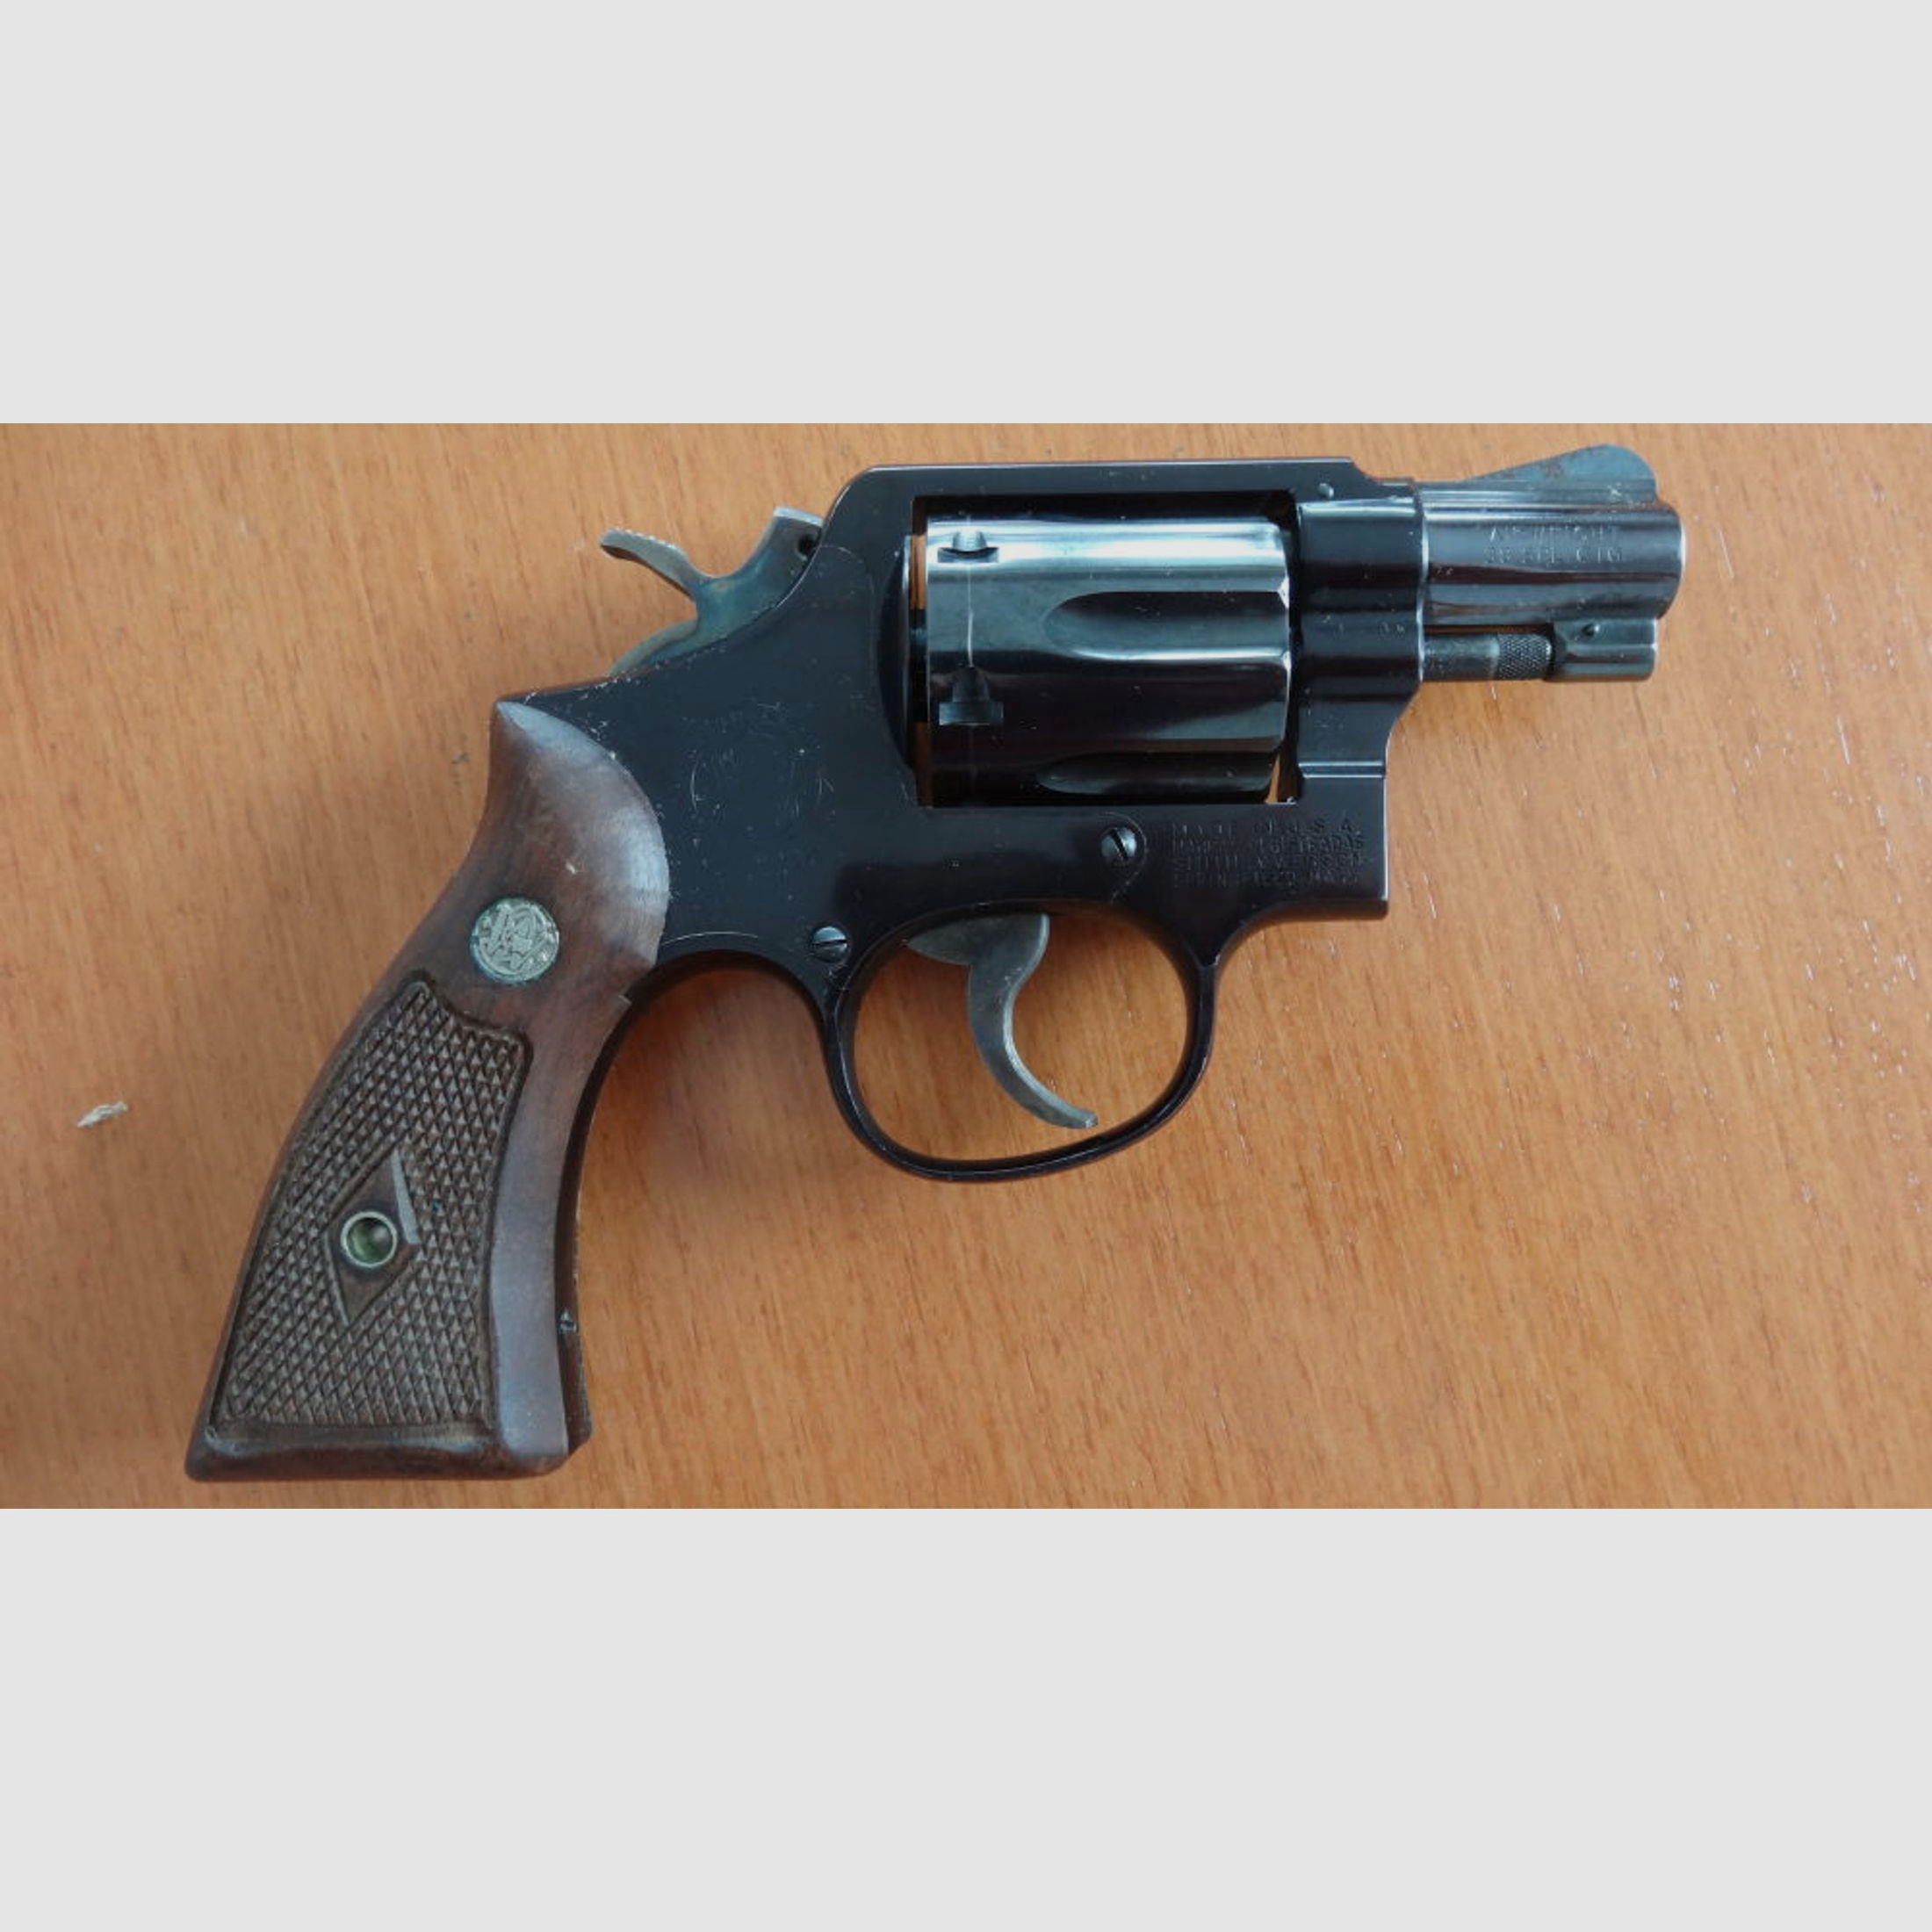 REVOLVER: SMITH & WESSON MODEL	 REVOLVER: SMITH & WESSON MODEL 12-1 AIRWEIGHT CAL. 38 SPECIAL.